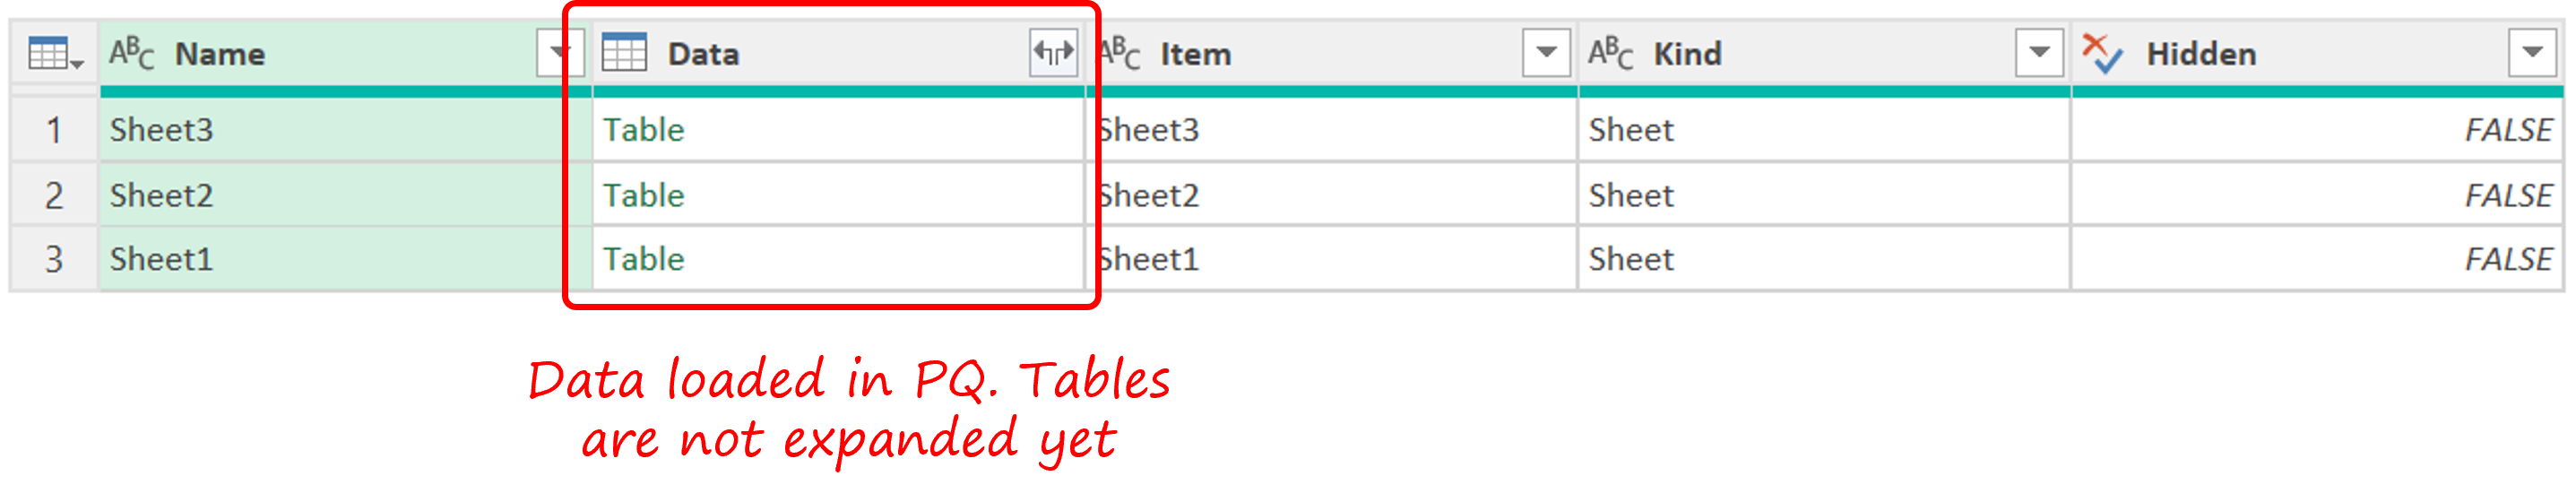 Remove top rows and combine data from multiple excel files - Data